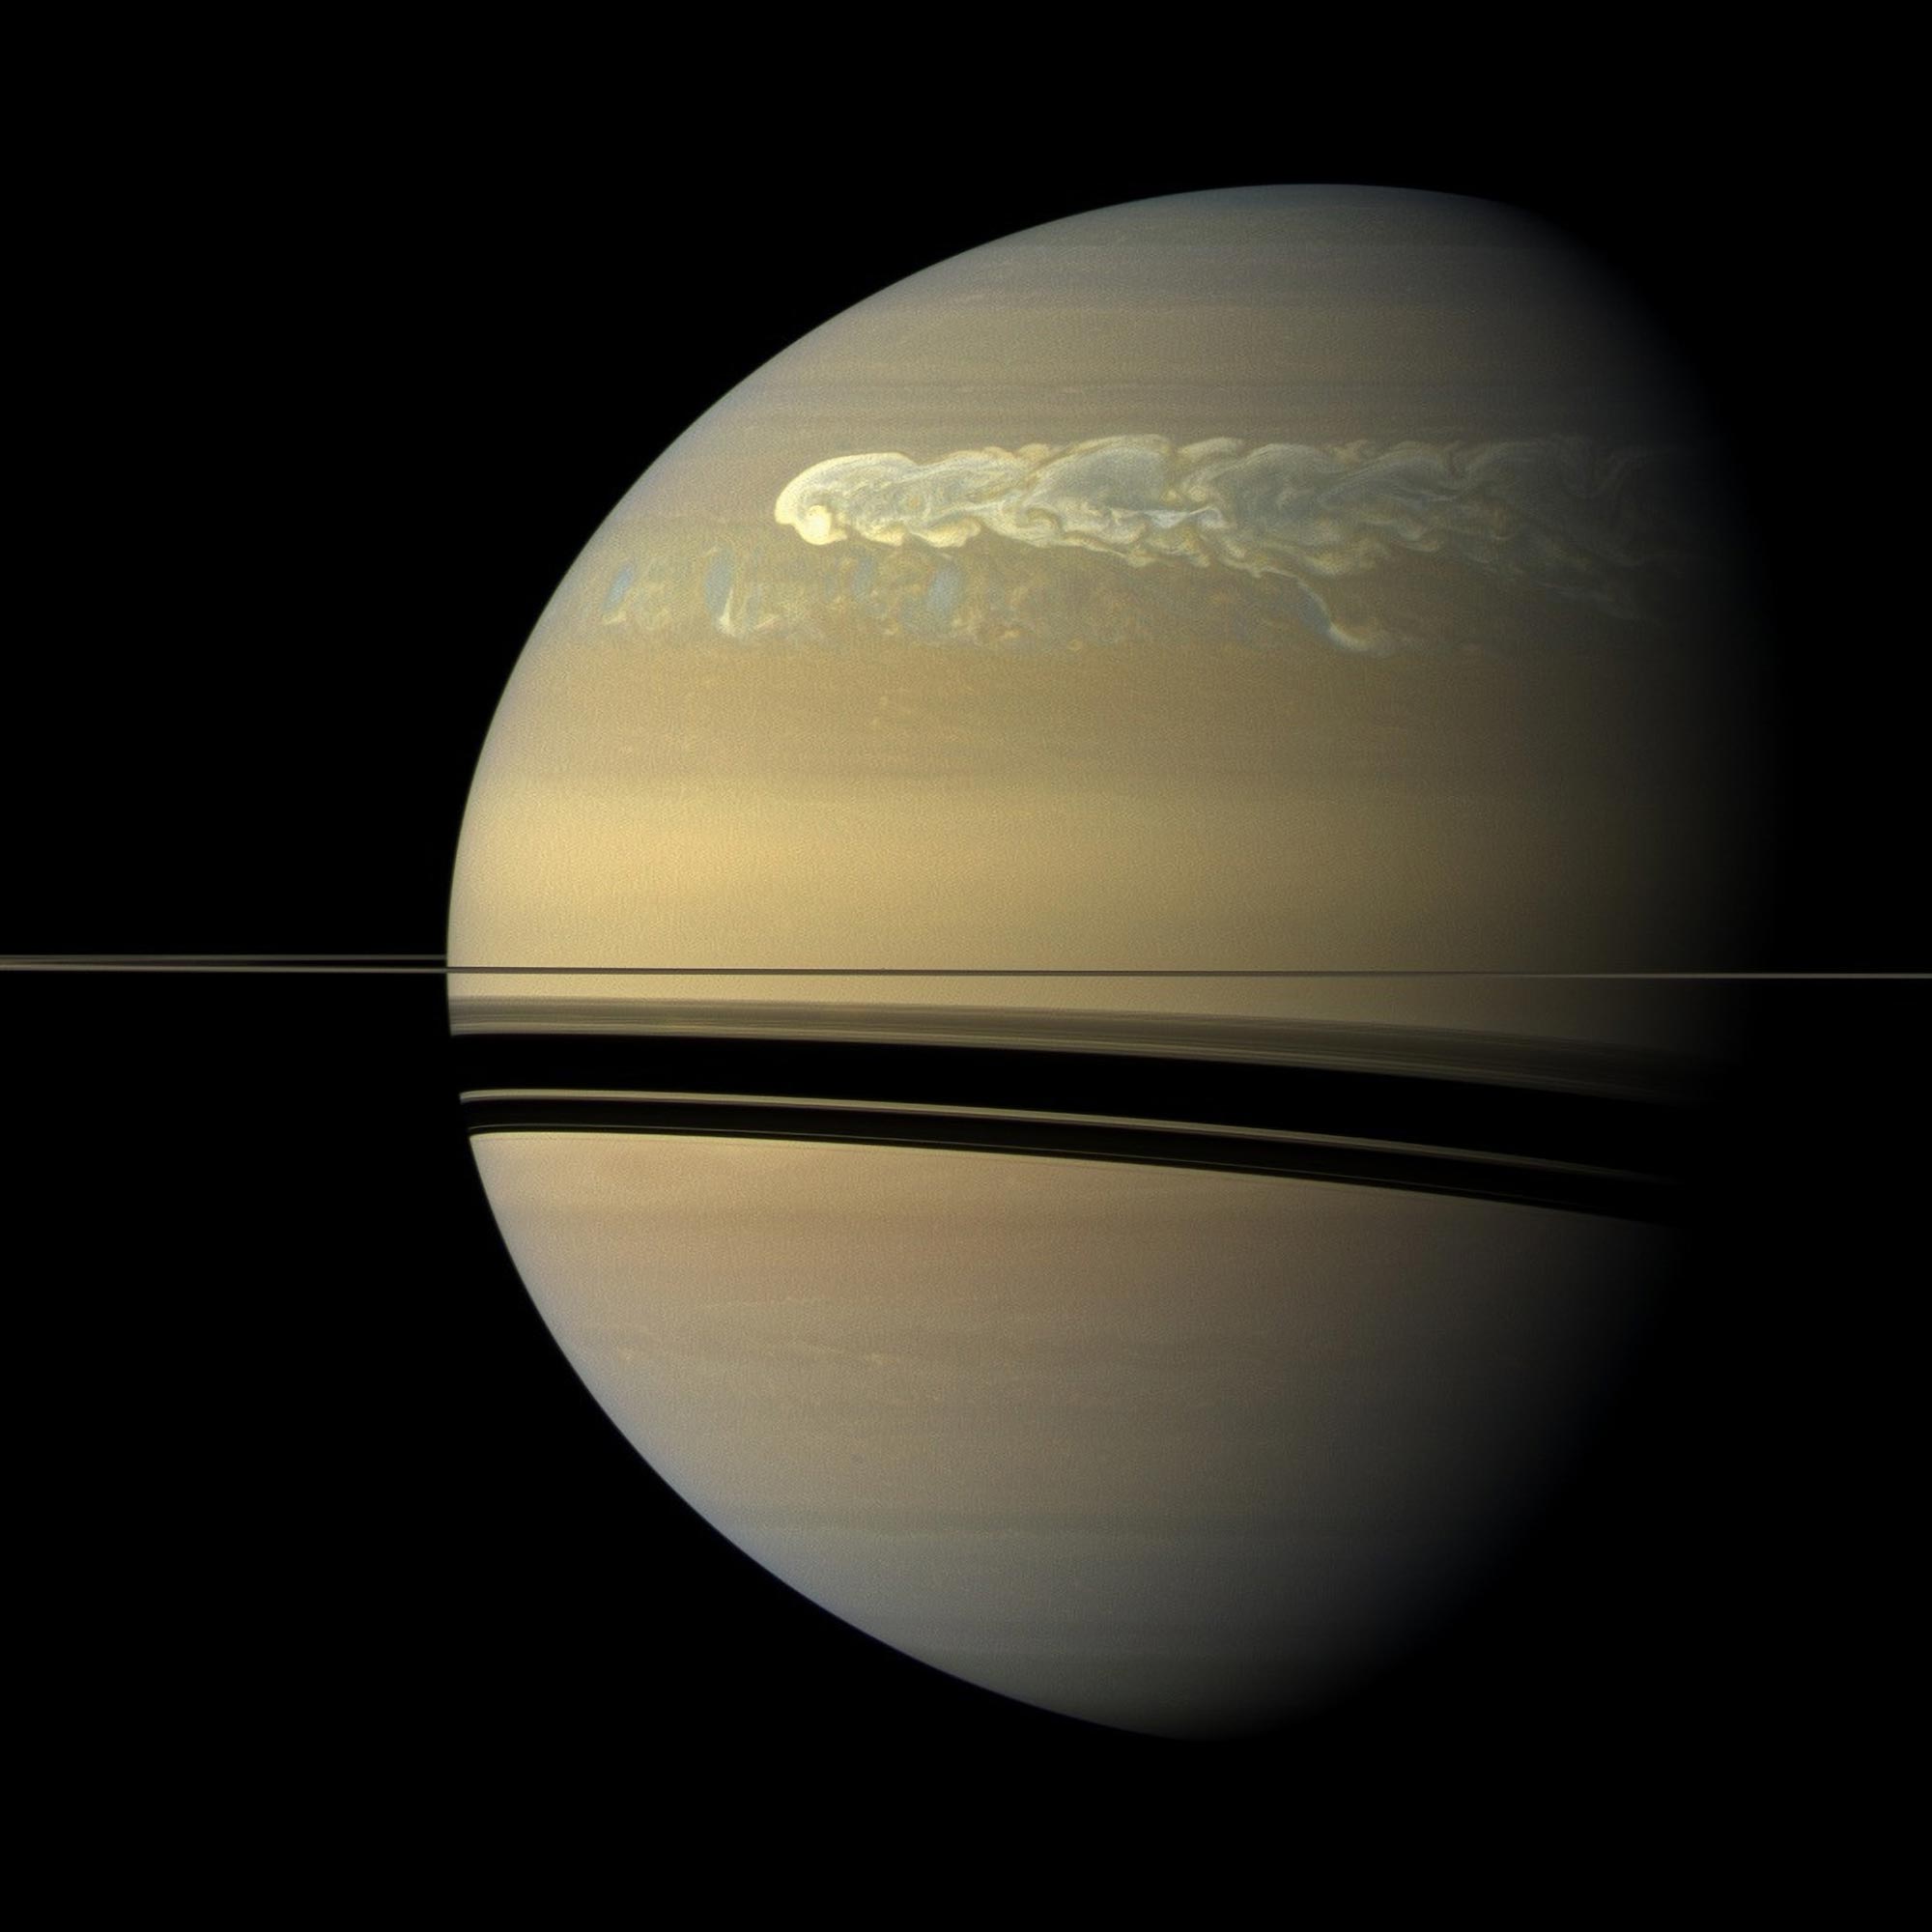 Cassini observes how a giant storm occurs and surrounds Saturn